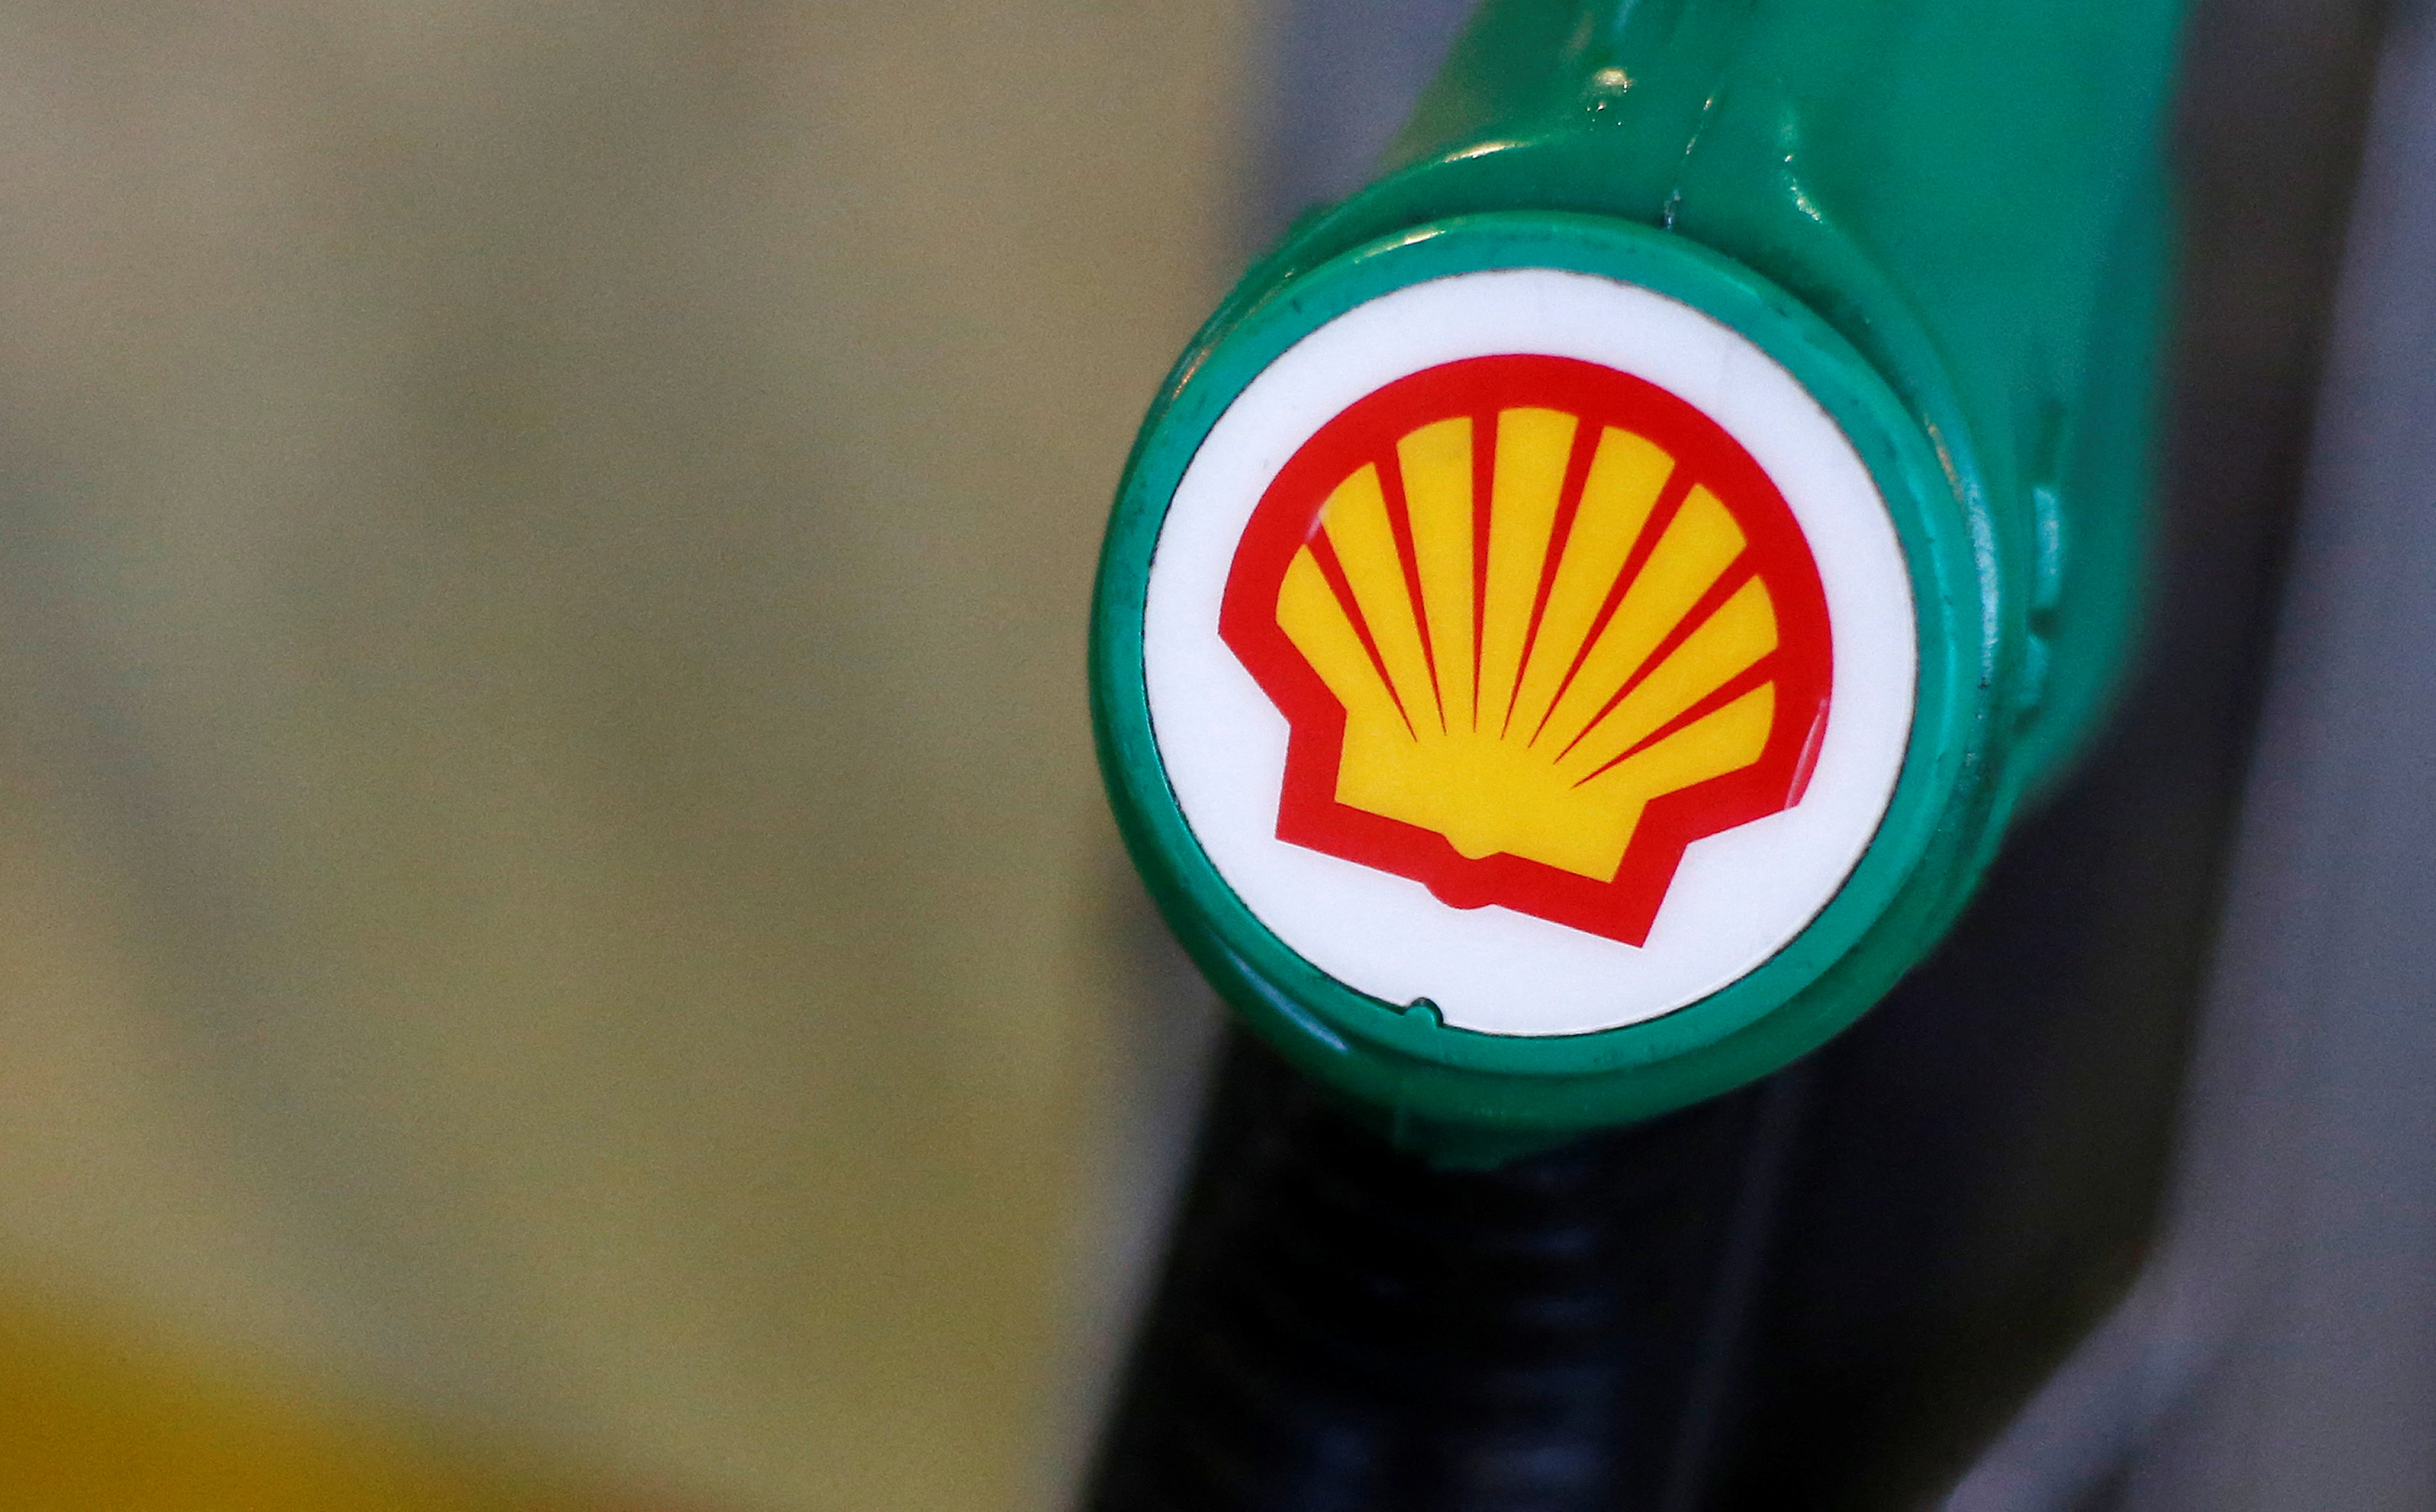 The Shell logo is seen on a pump at a Shell petrol station in London